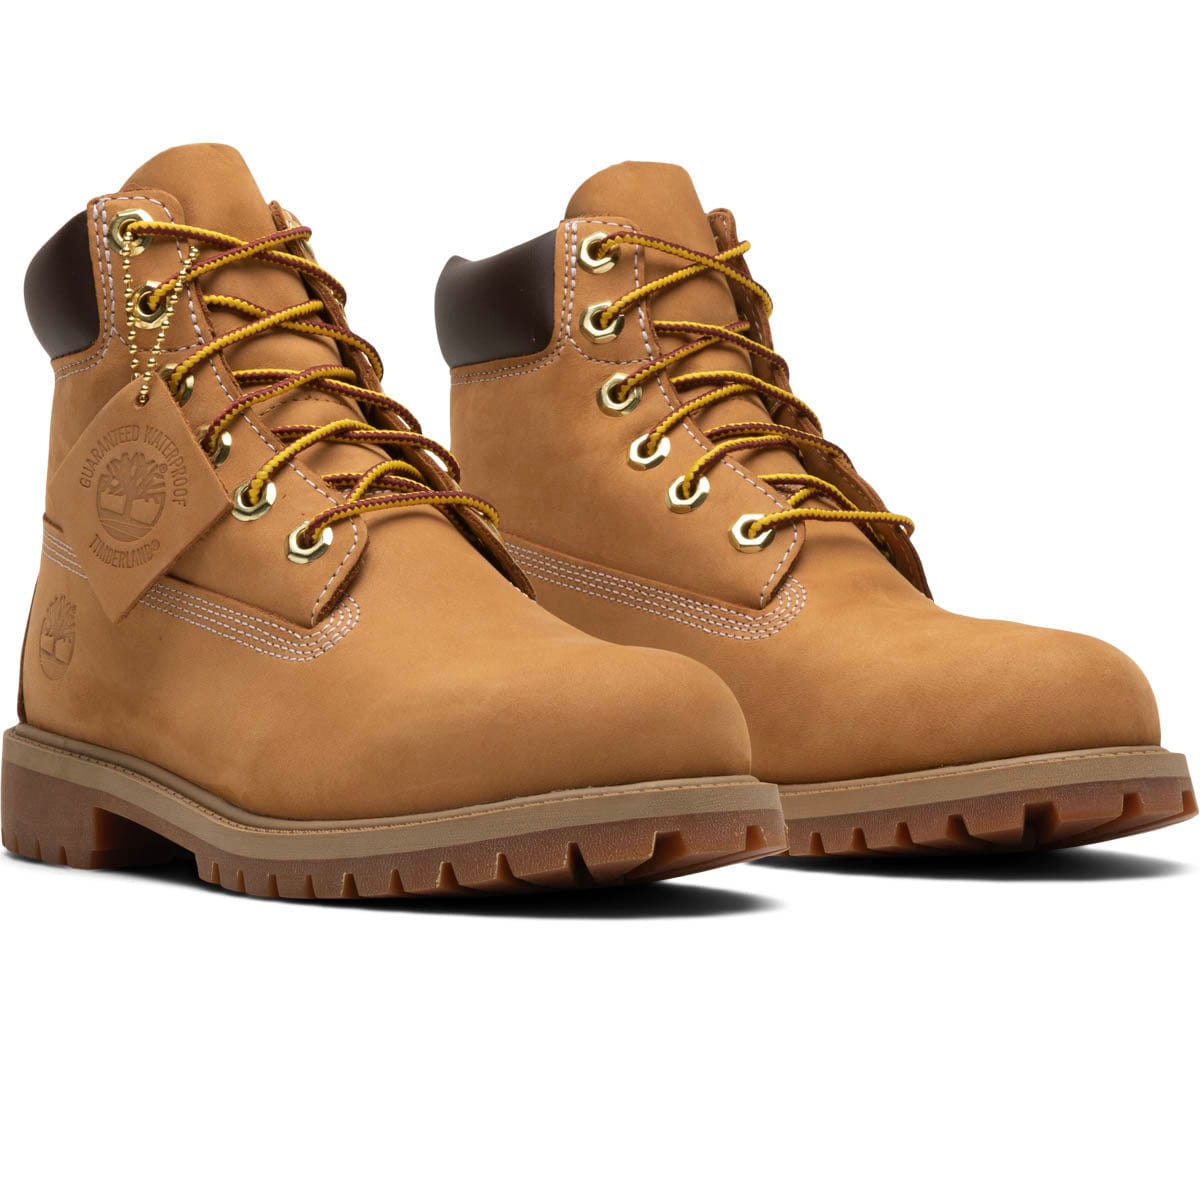 Timberland Youth YOUTH 6 IN. PREMIUM BOOT